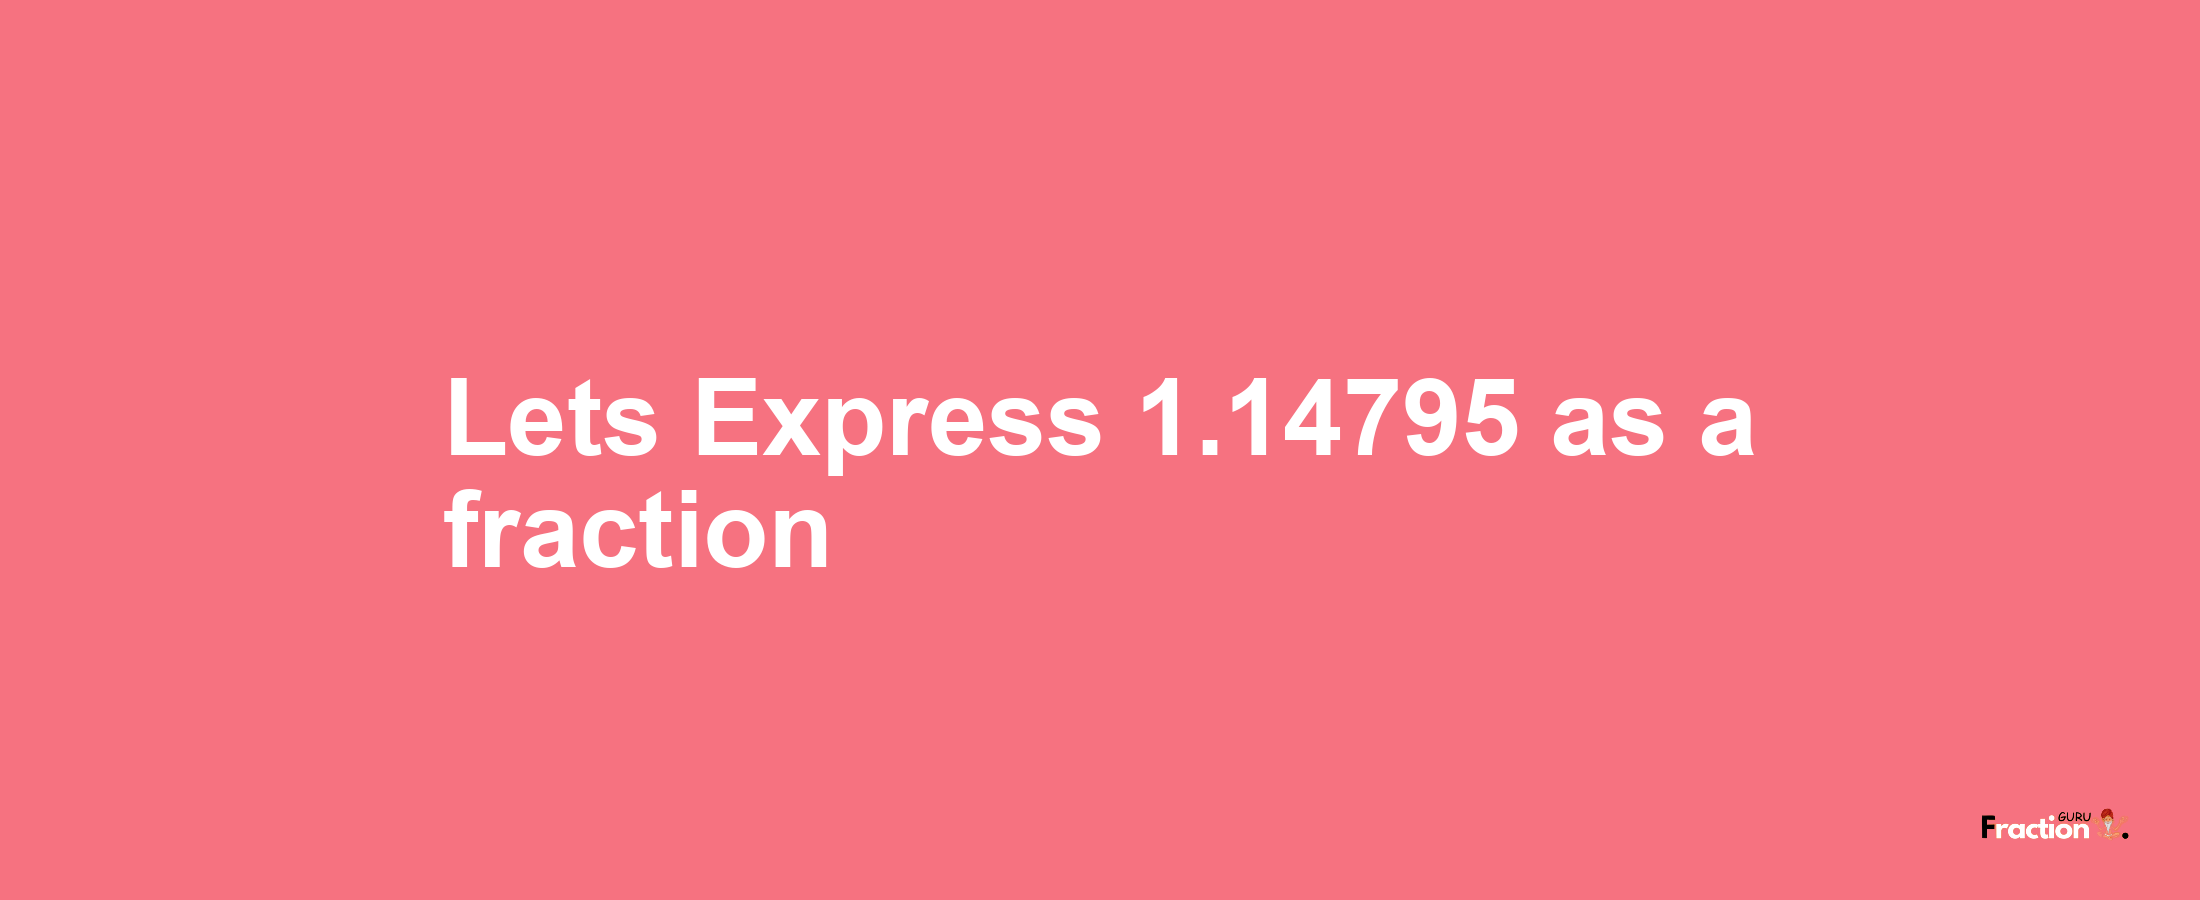 Lets Express 1.14795 as afraction